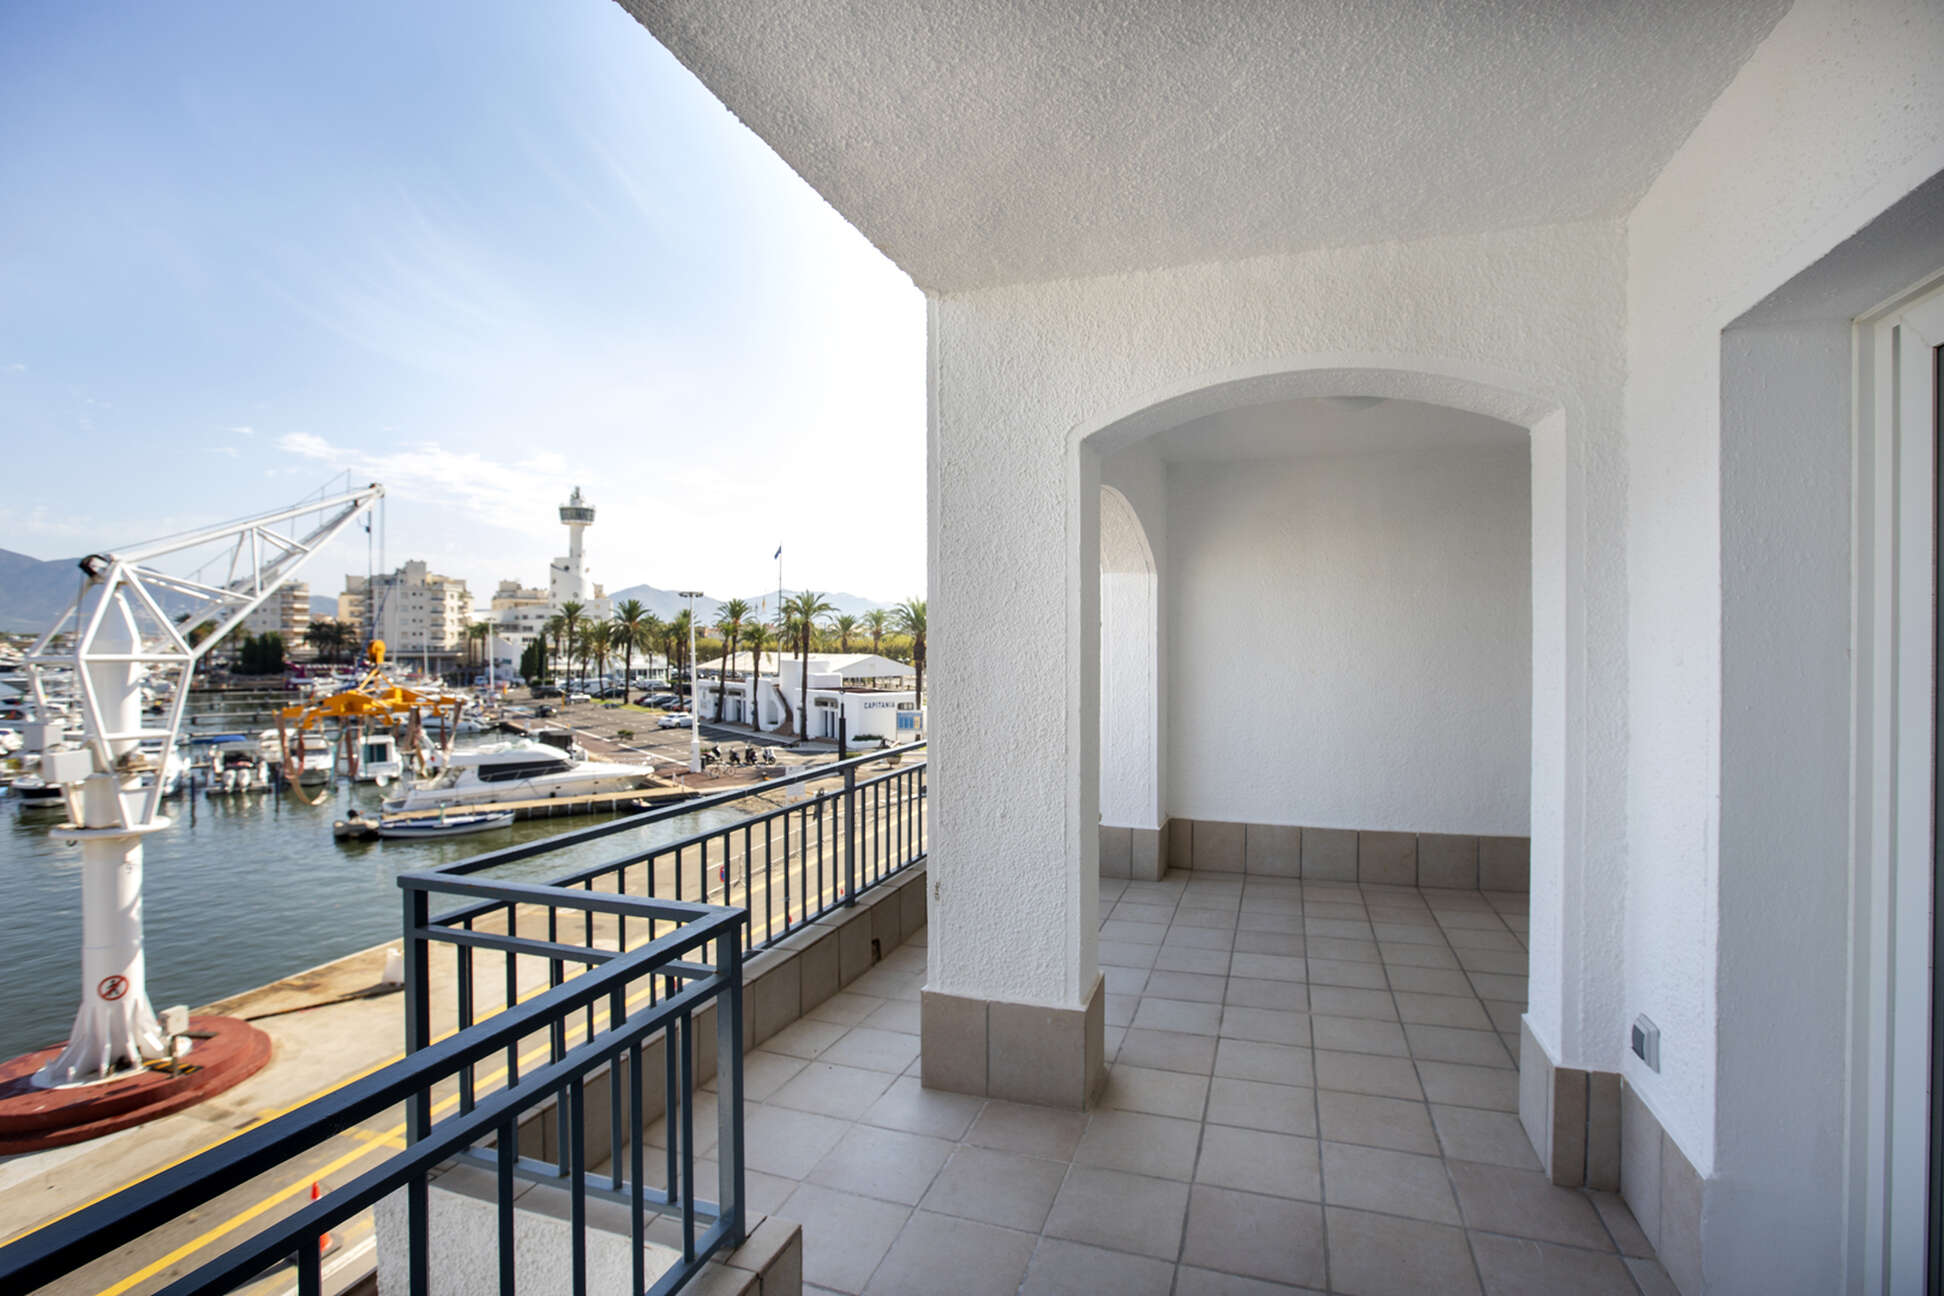 Renovated apartment with views of the Port of Empuriabrava